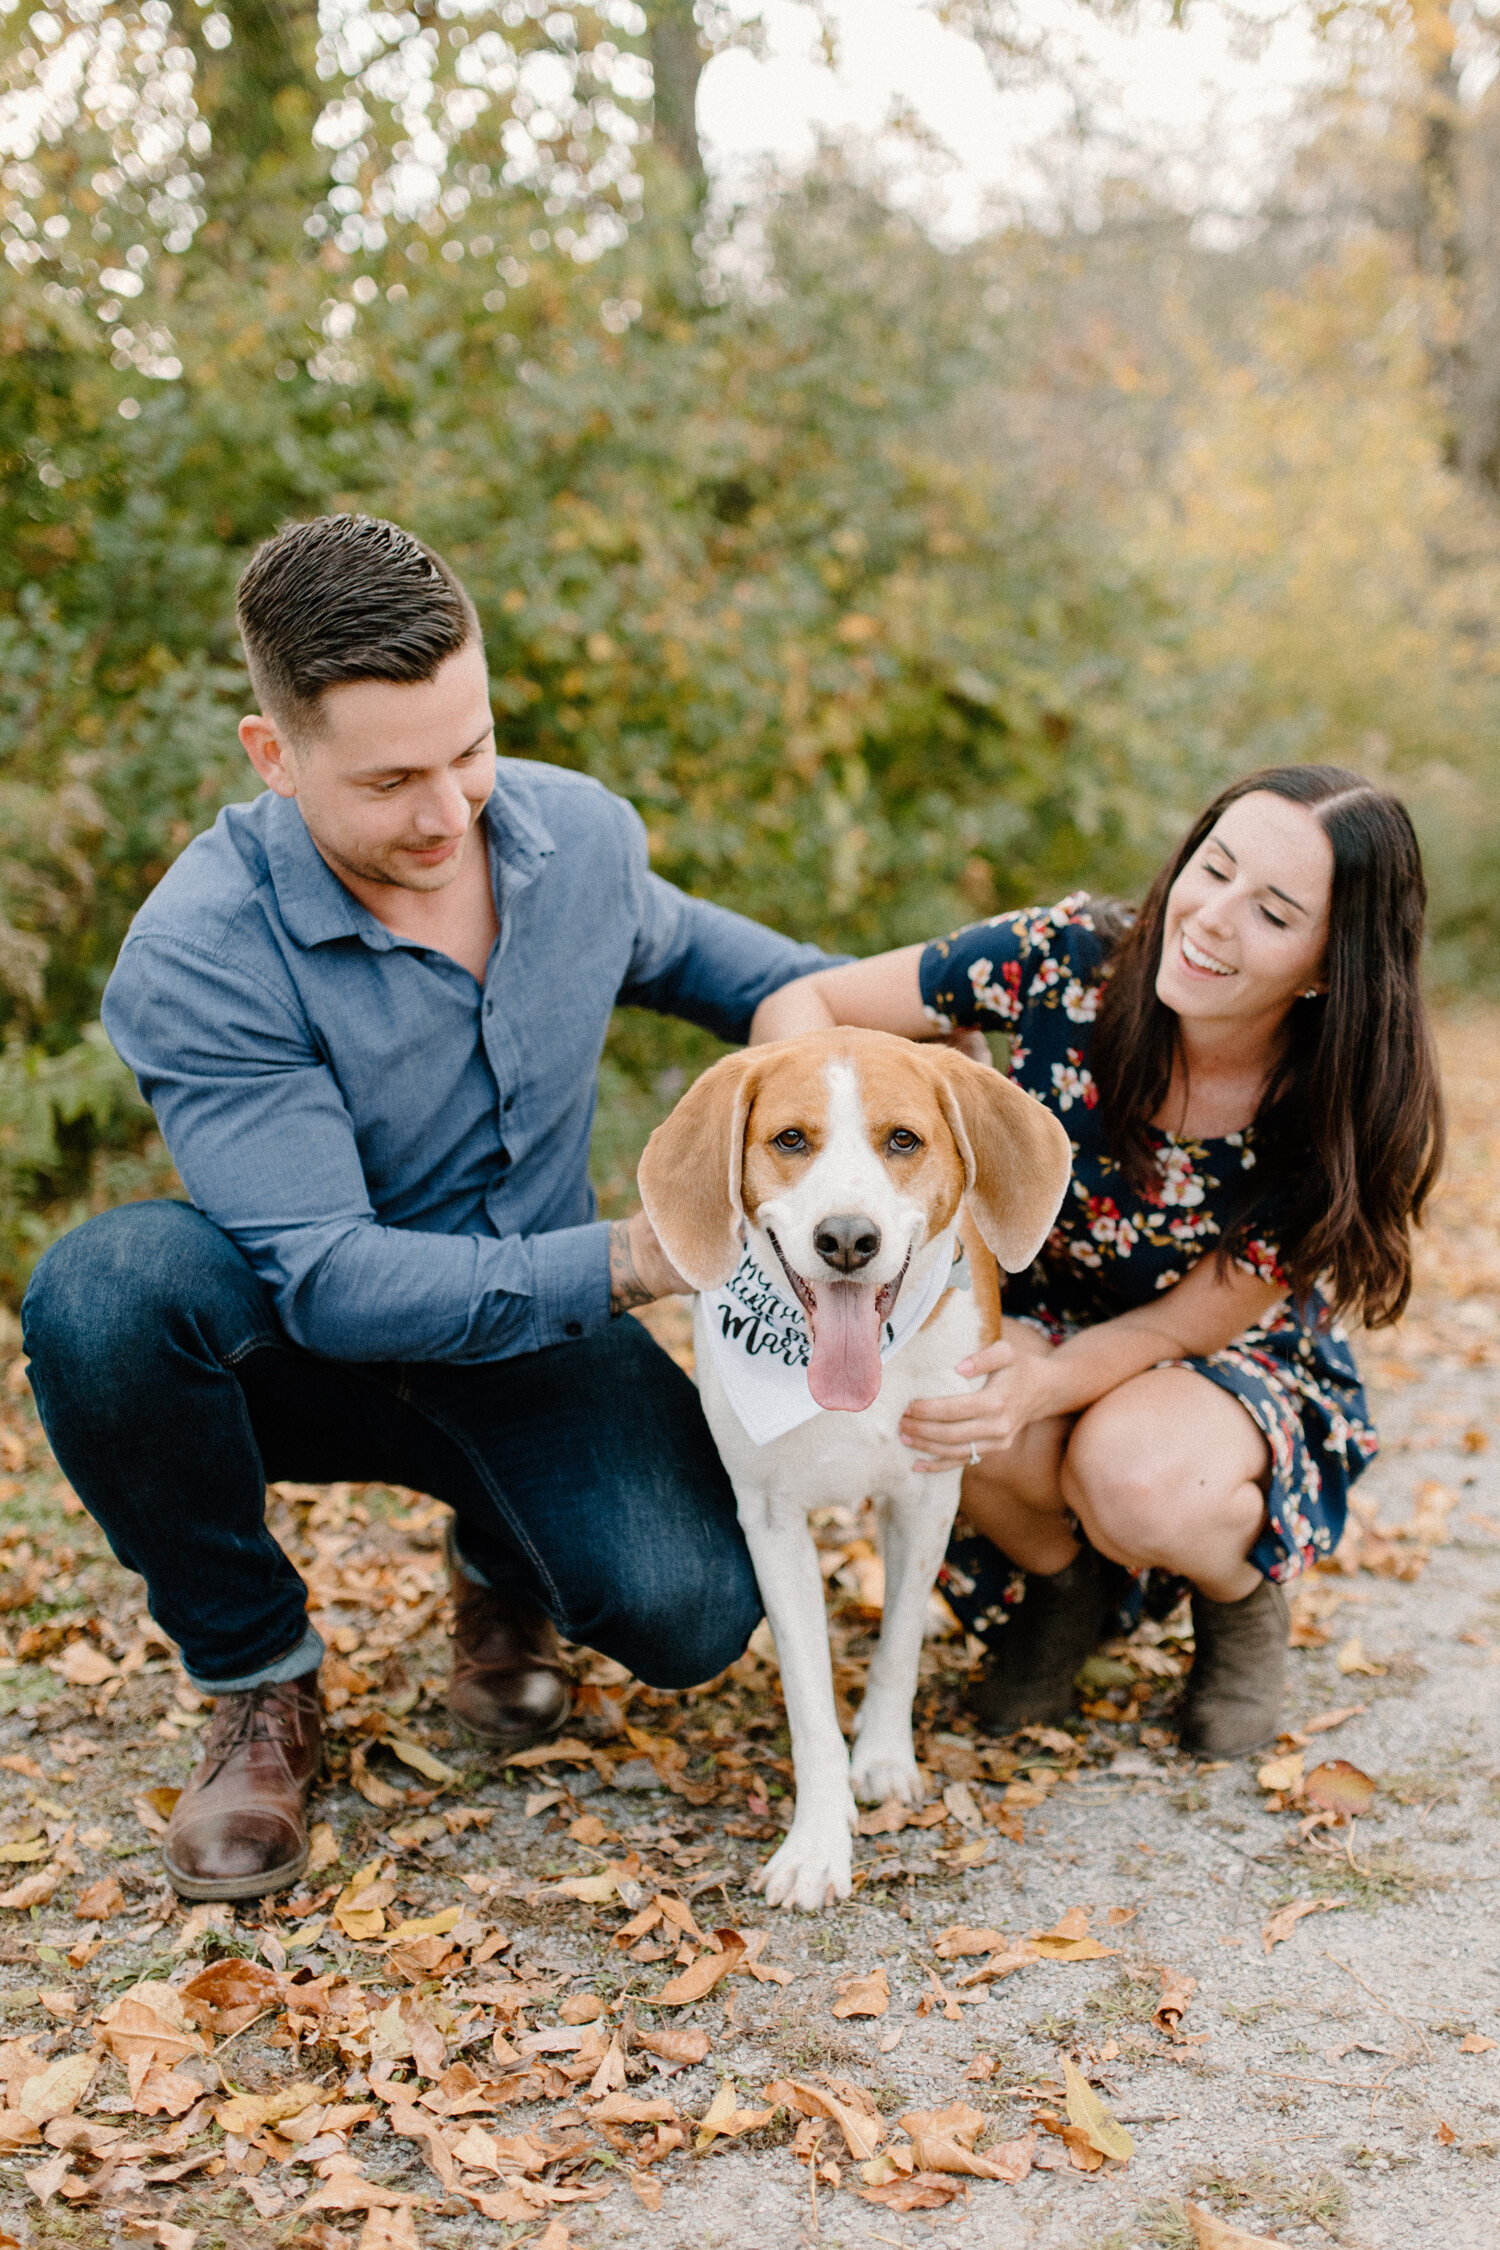   During their autumn engagement session in Brockville Ontario, Chelsea Mason Photography captures this engaged couple pose with their bloodhound dog. brockville ontario engagement photographer bloodhound family dog family photo session couple smilin